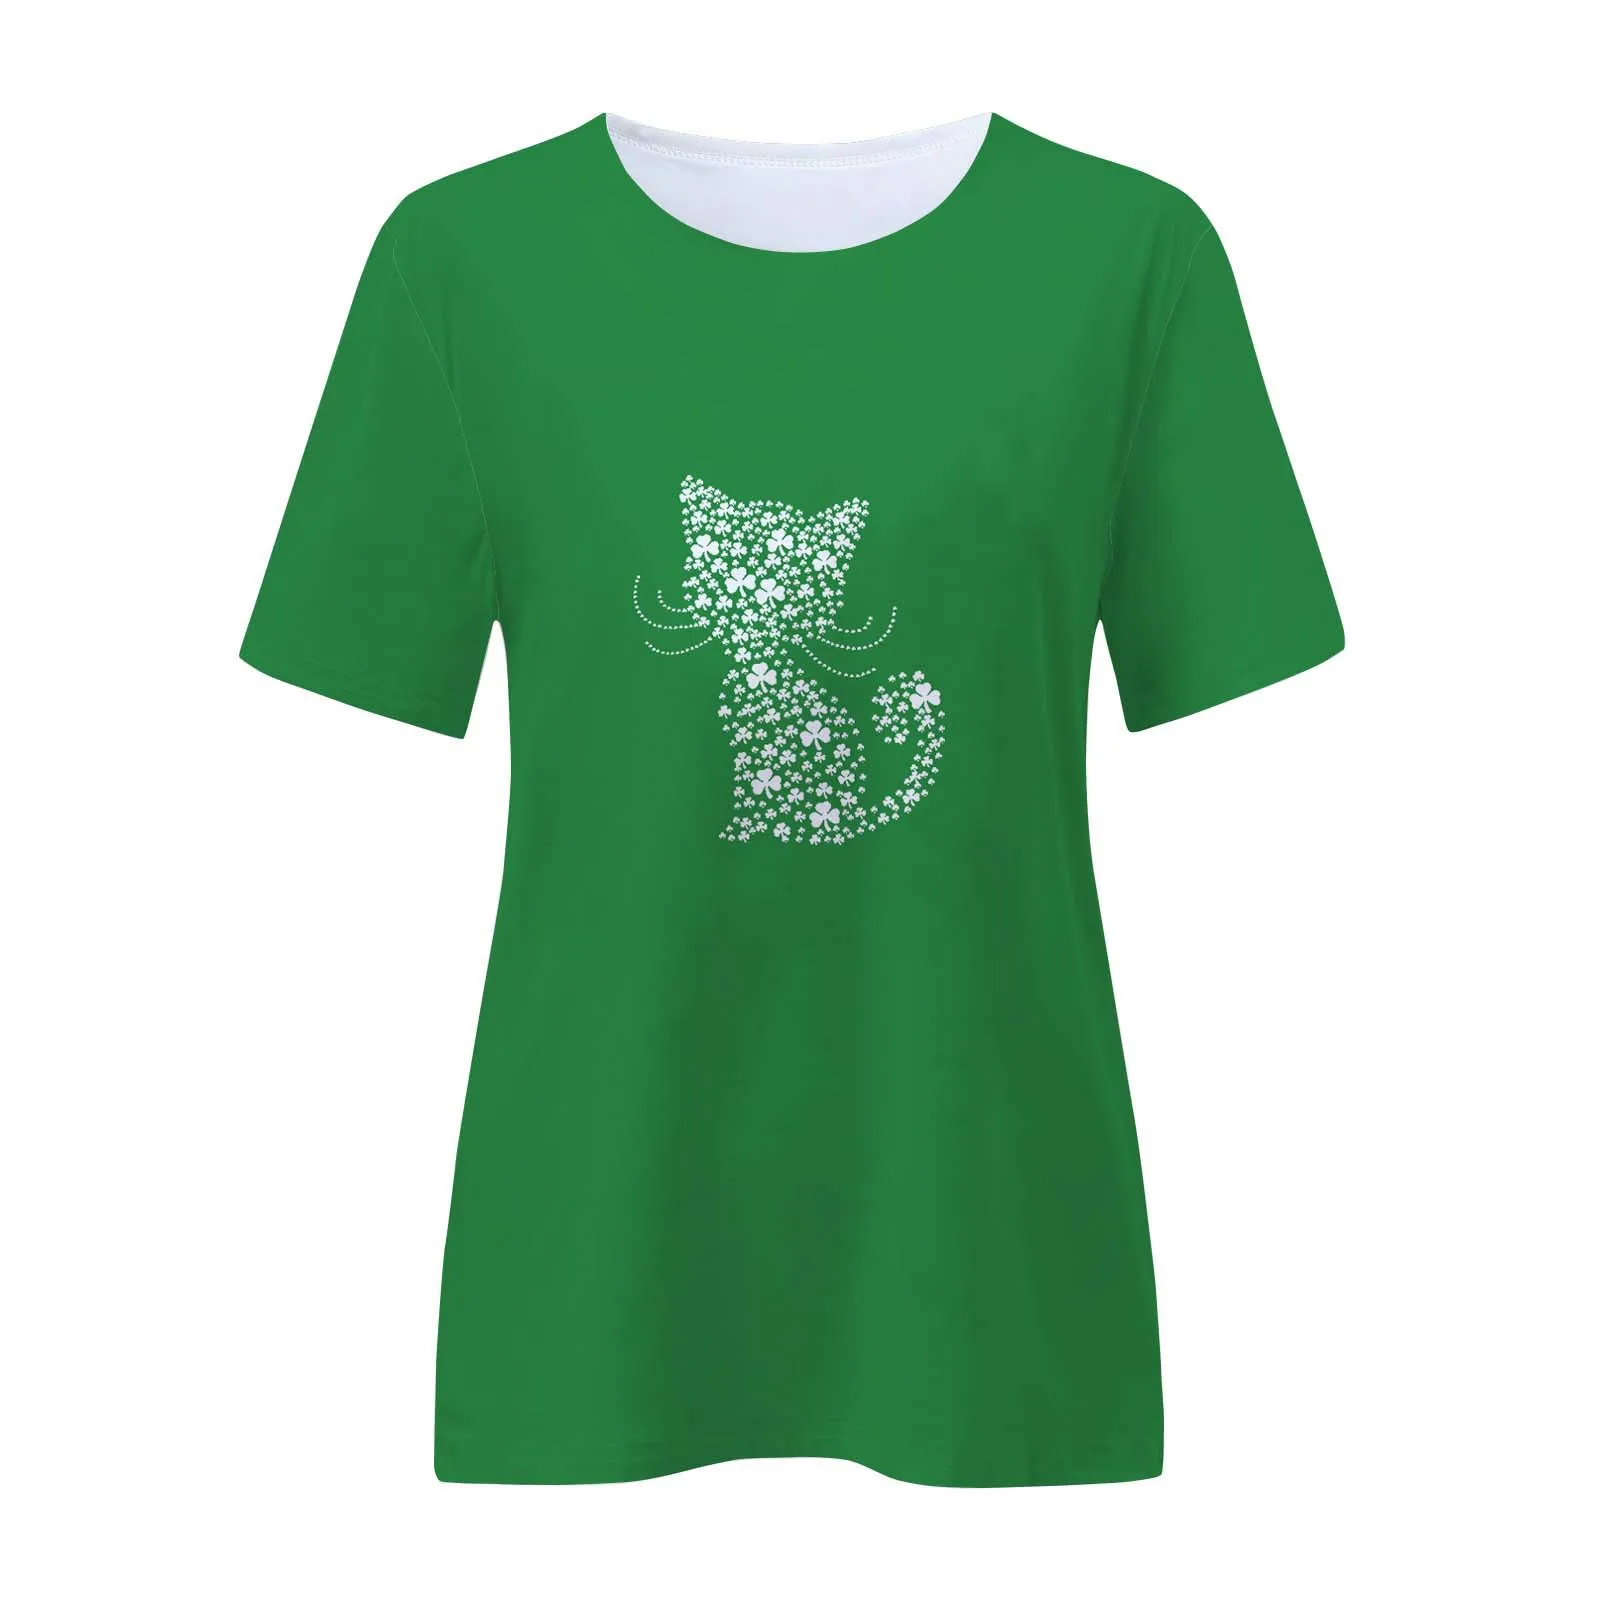 Patrick’s Day Short Sleeve Tops Ladies T shirt Harajuku St Patricks Day Gift May The Luck Of the Irish Be With You Popular Tops friends t shirt